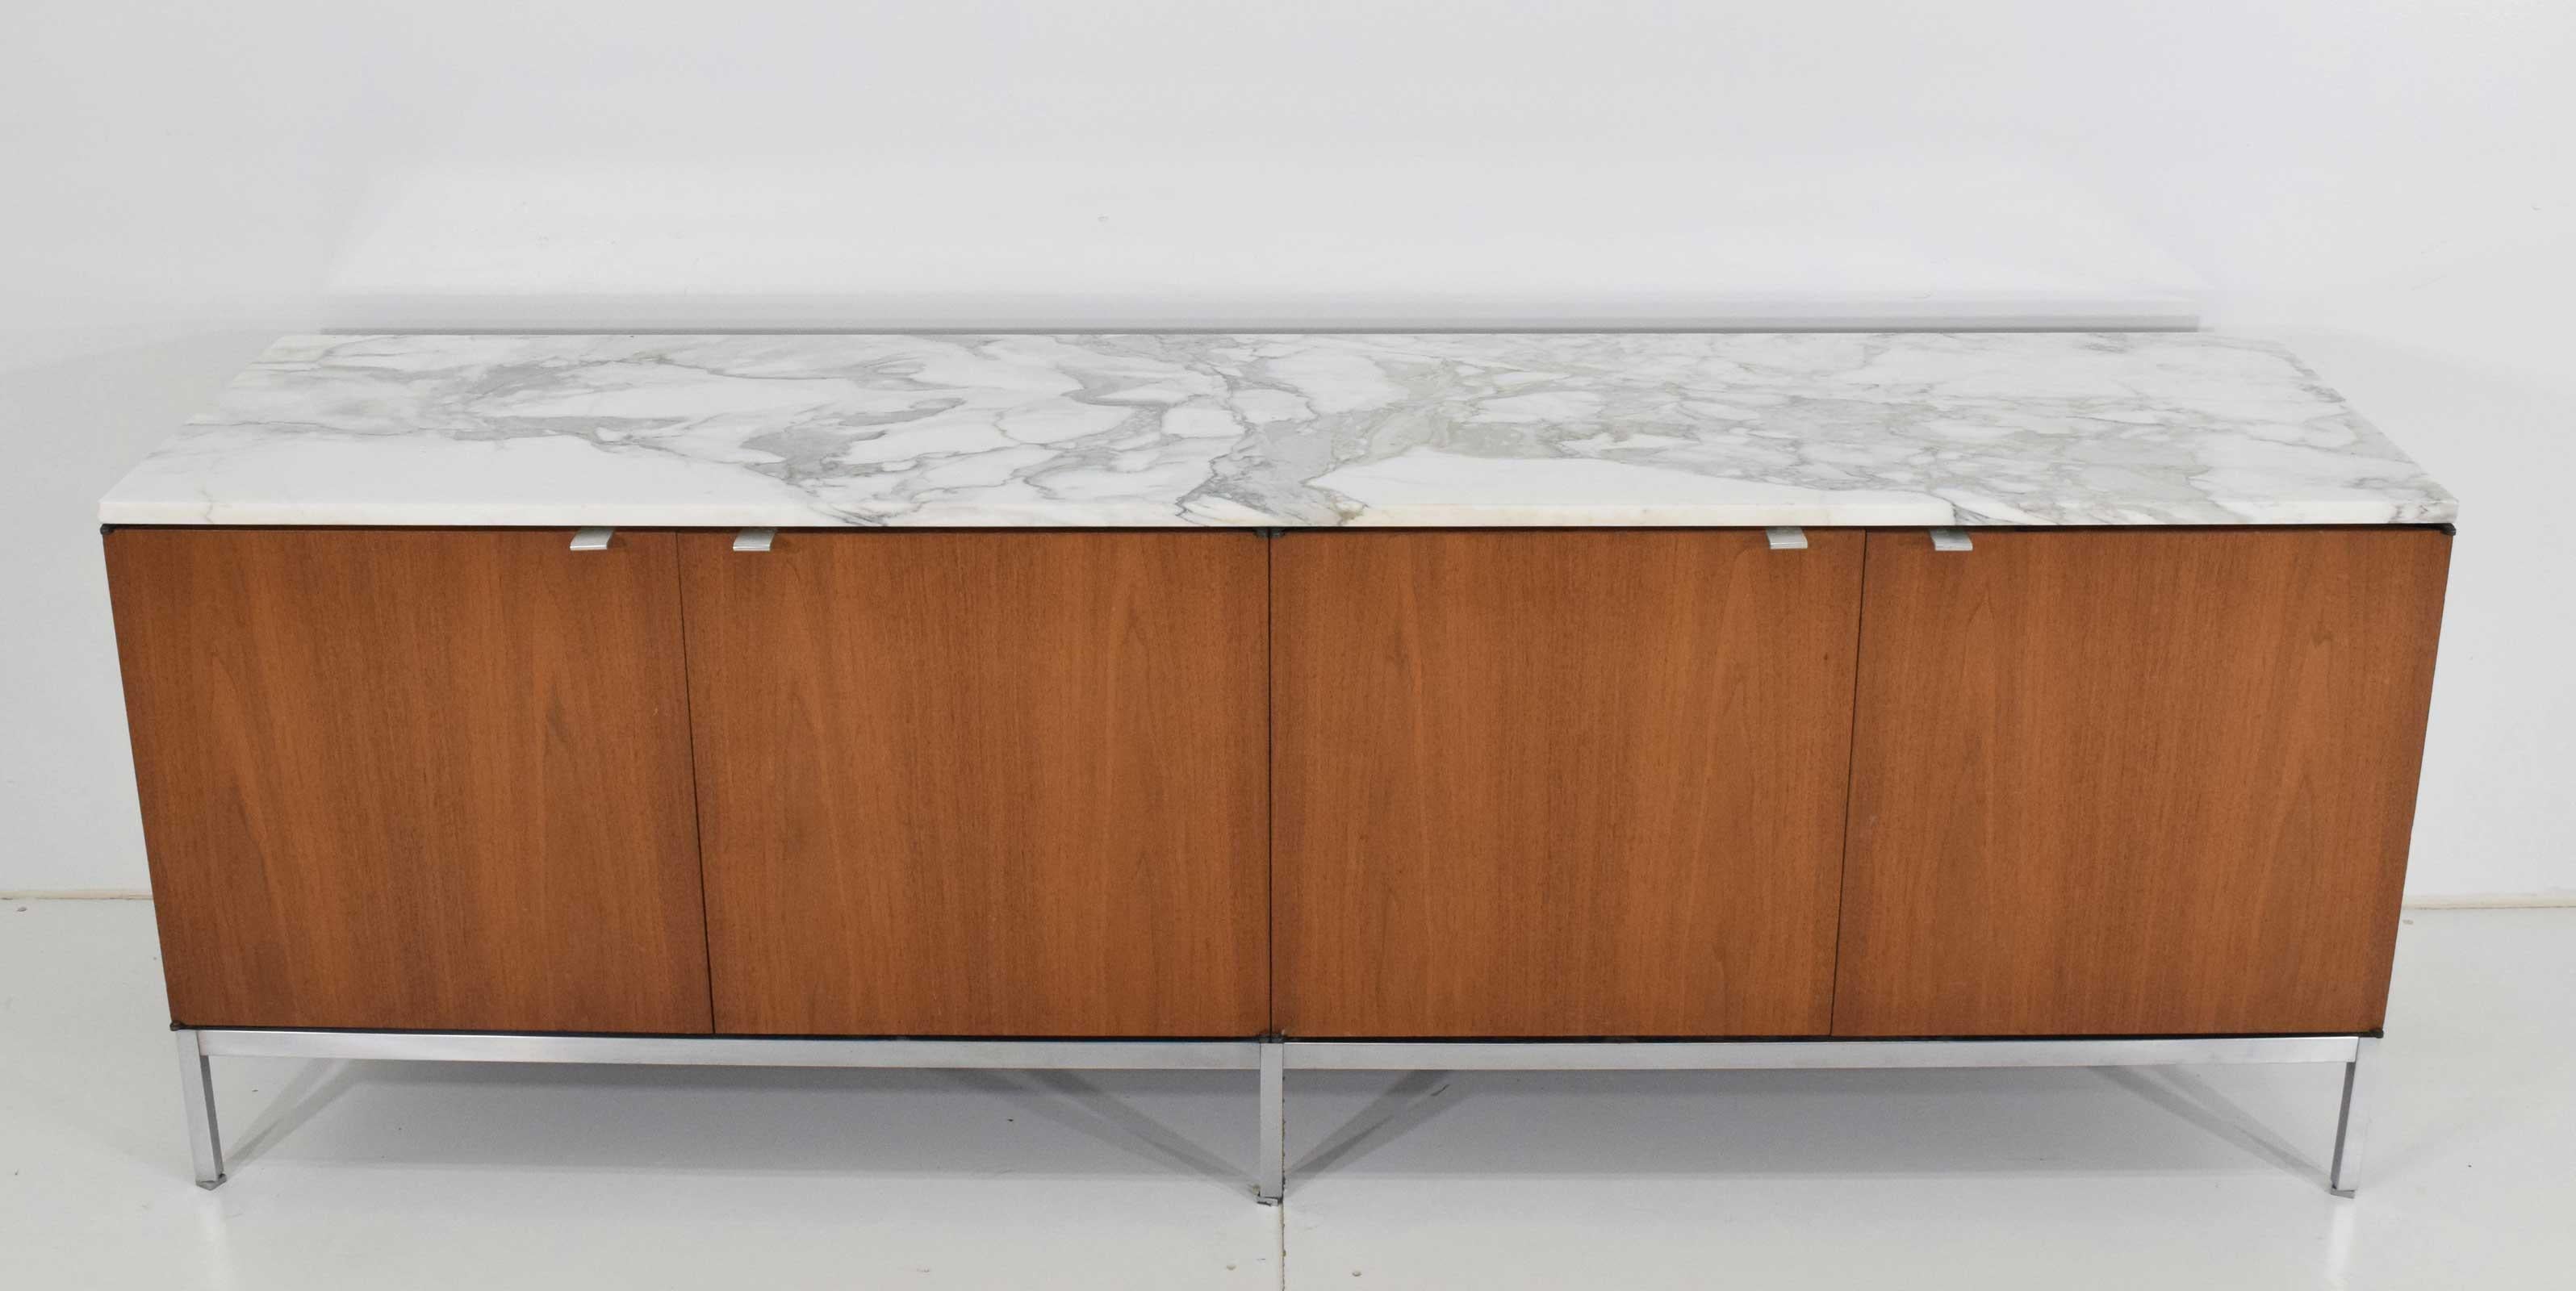 Beautiful credenza from 1960s by Florence Knoll. Carrera marble top. Plenty of shelf storage below.